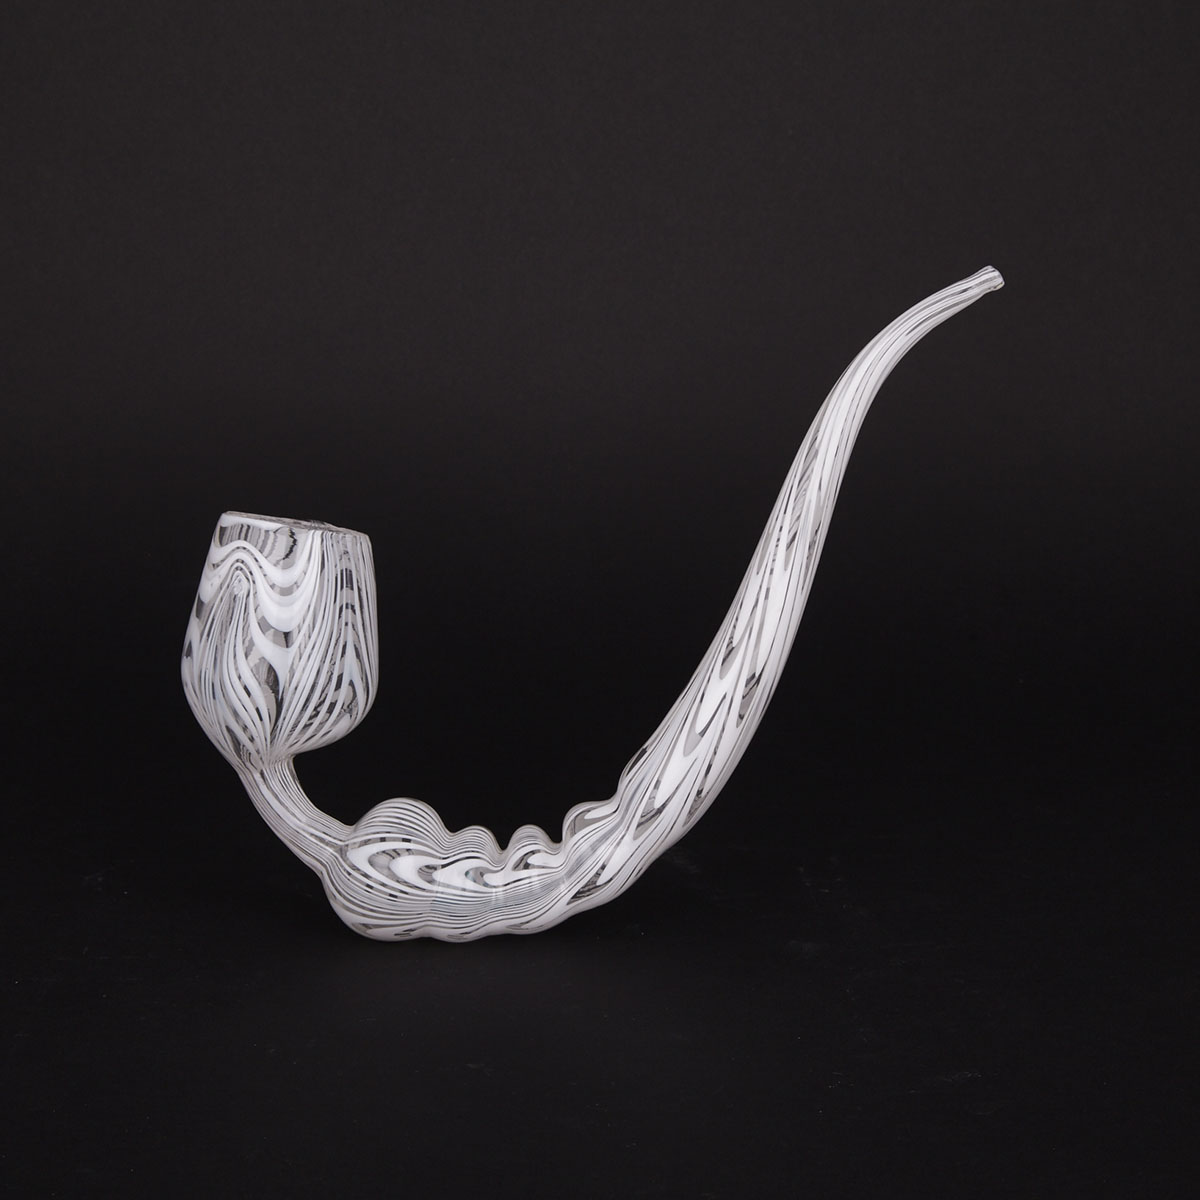 Nailsea-Type Striated Opaque White Glass Pipe Whimsy, 19th century